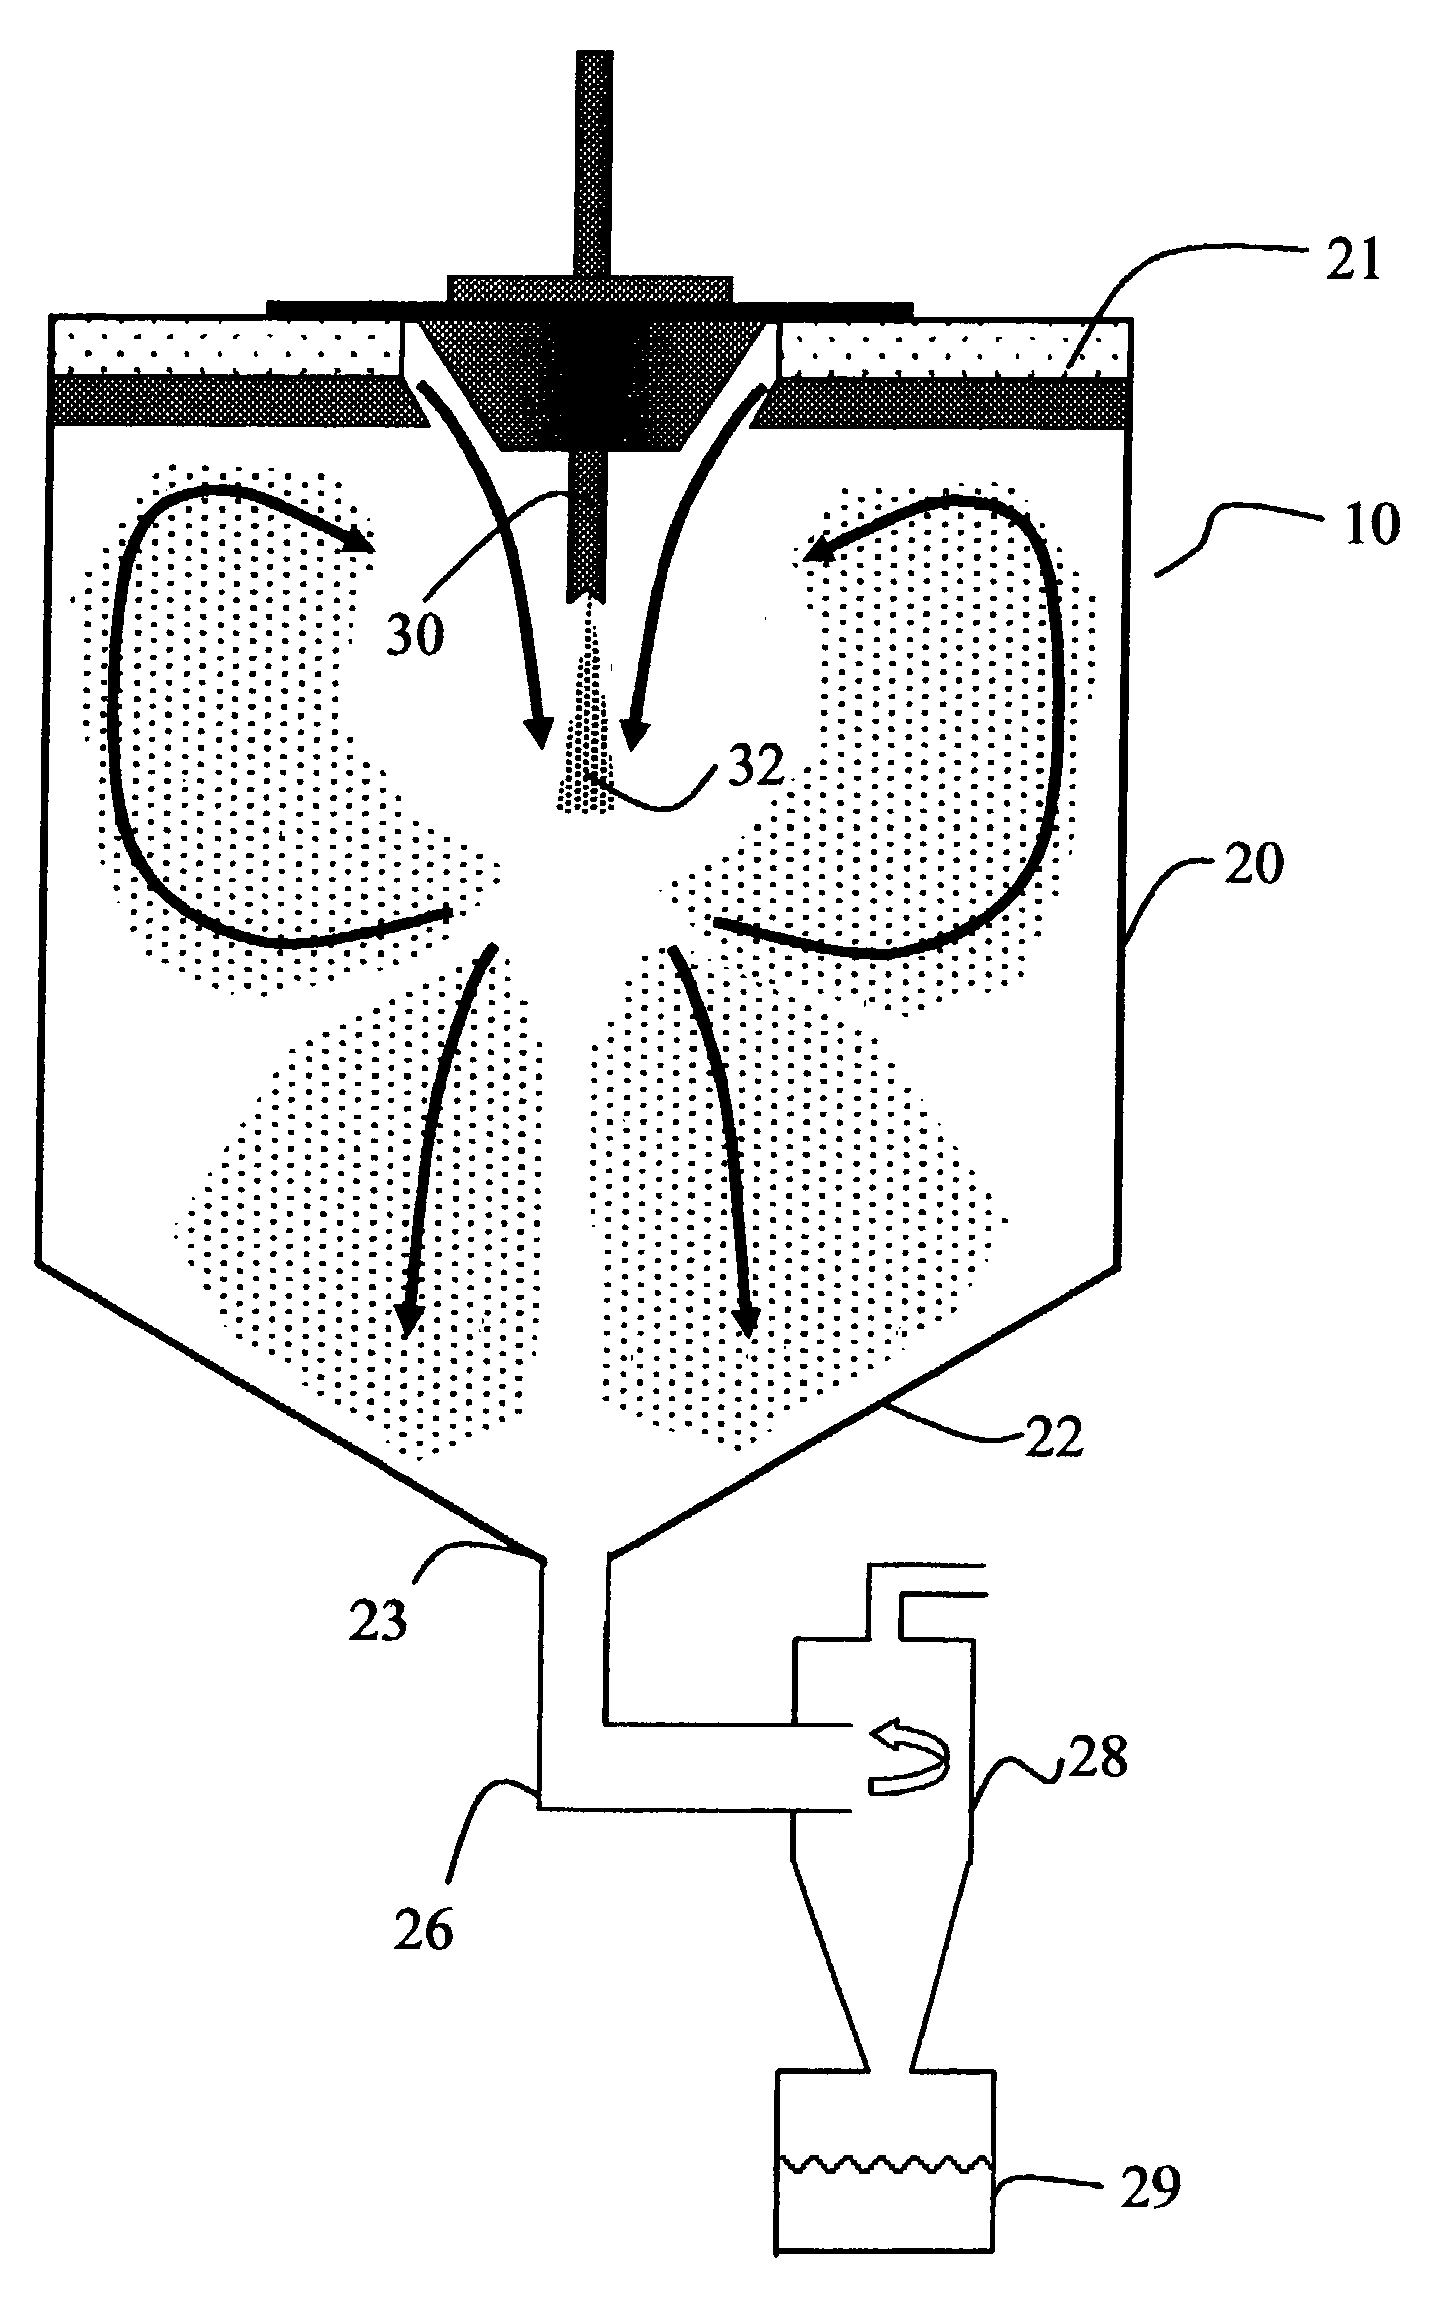 Method for making homogeneous spray-dried solid amorphous drug dispersions using pressure nozzles